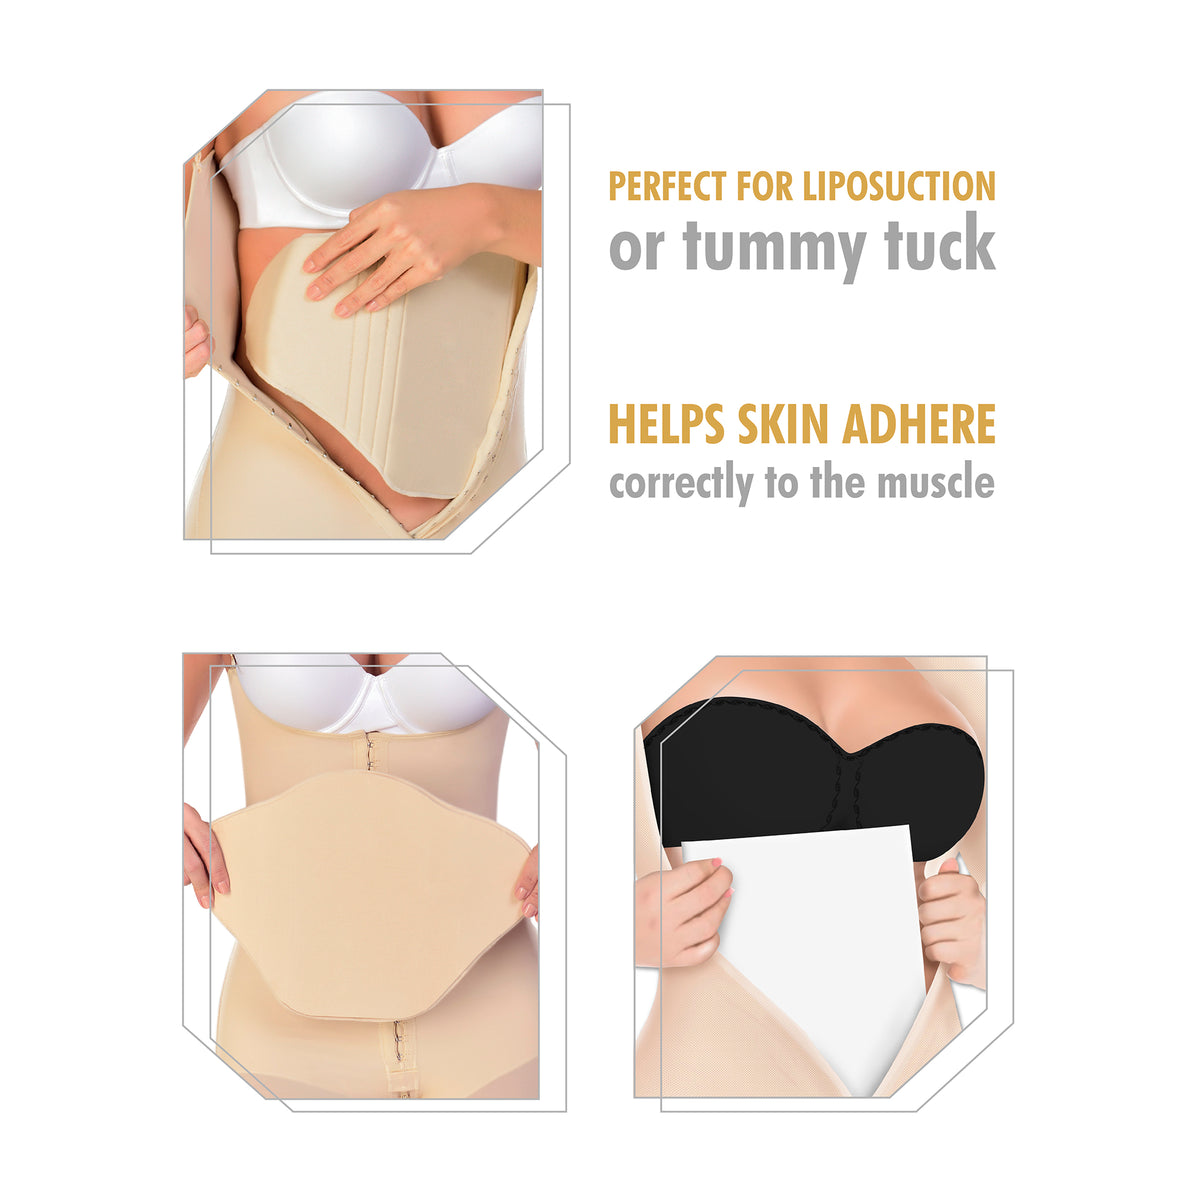 Be Shapy, M&D 0102 Liposuction Compression Board